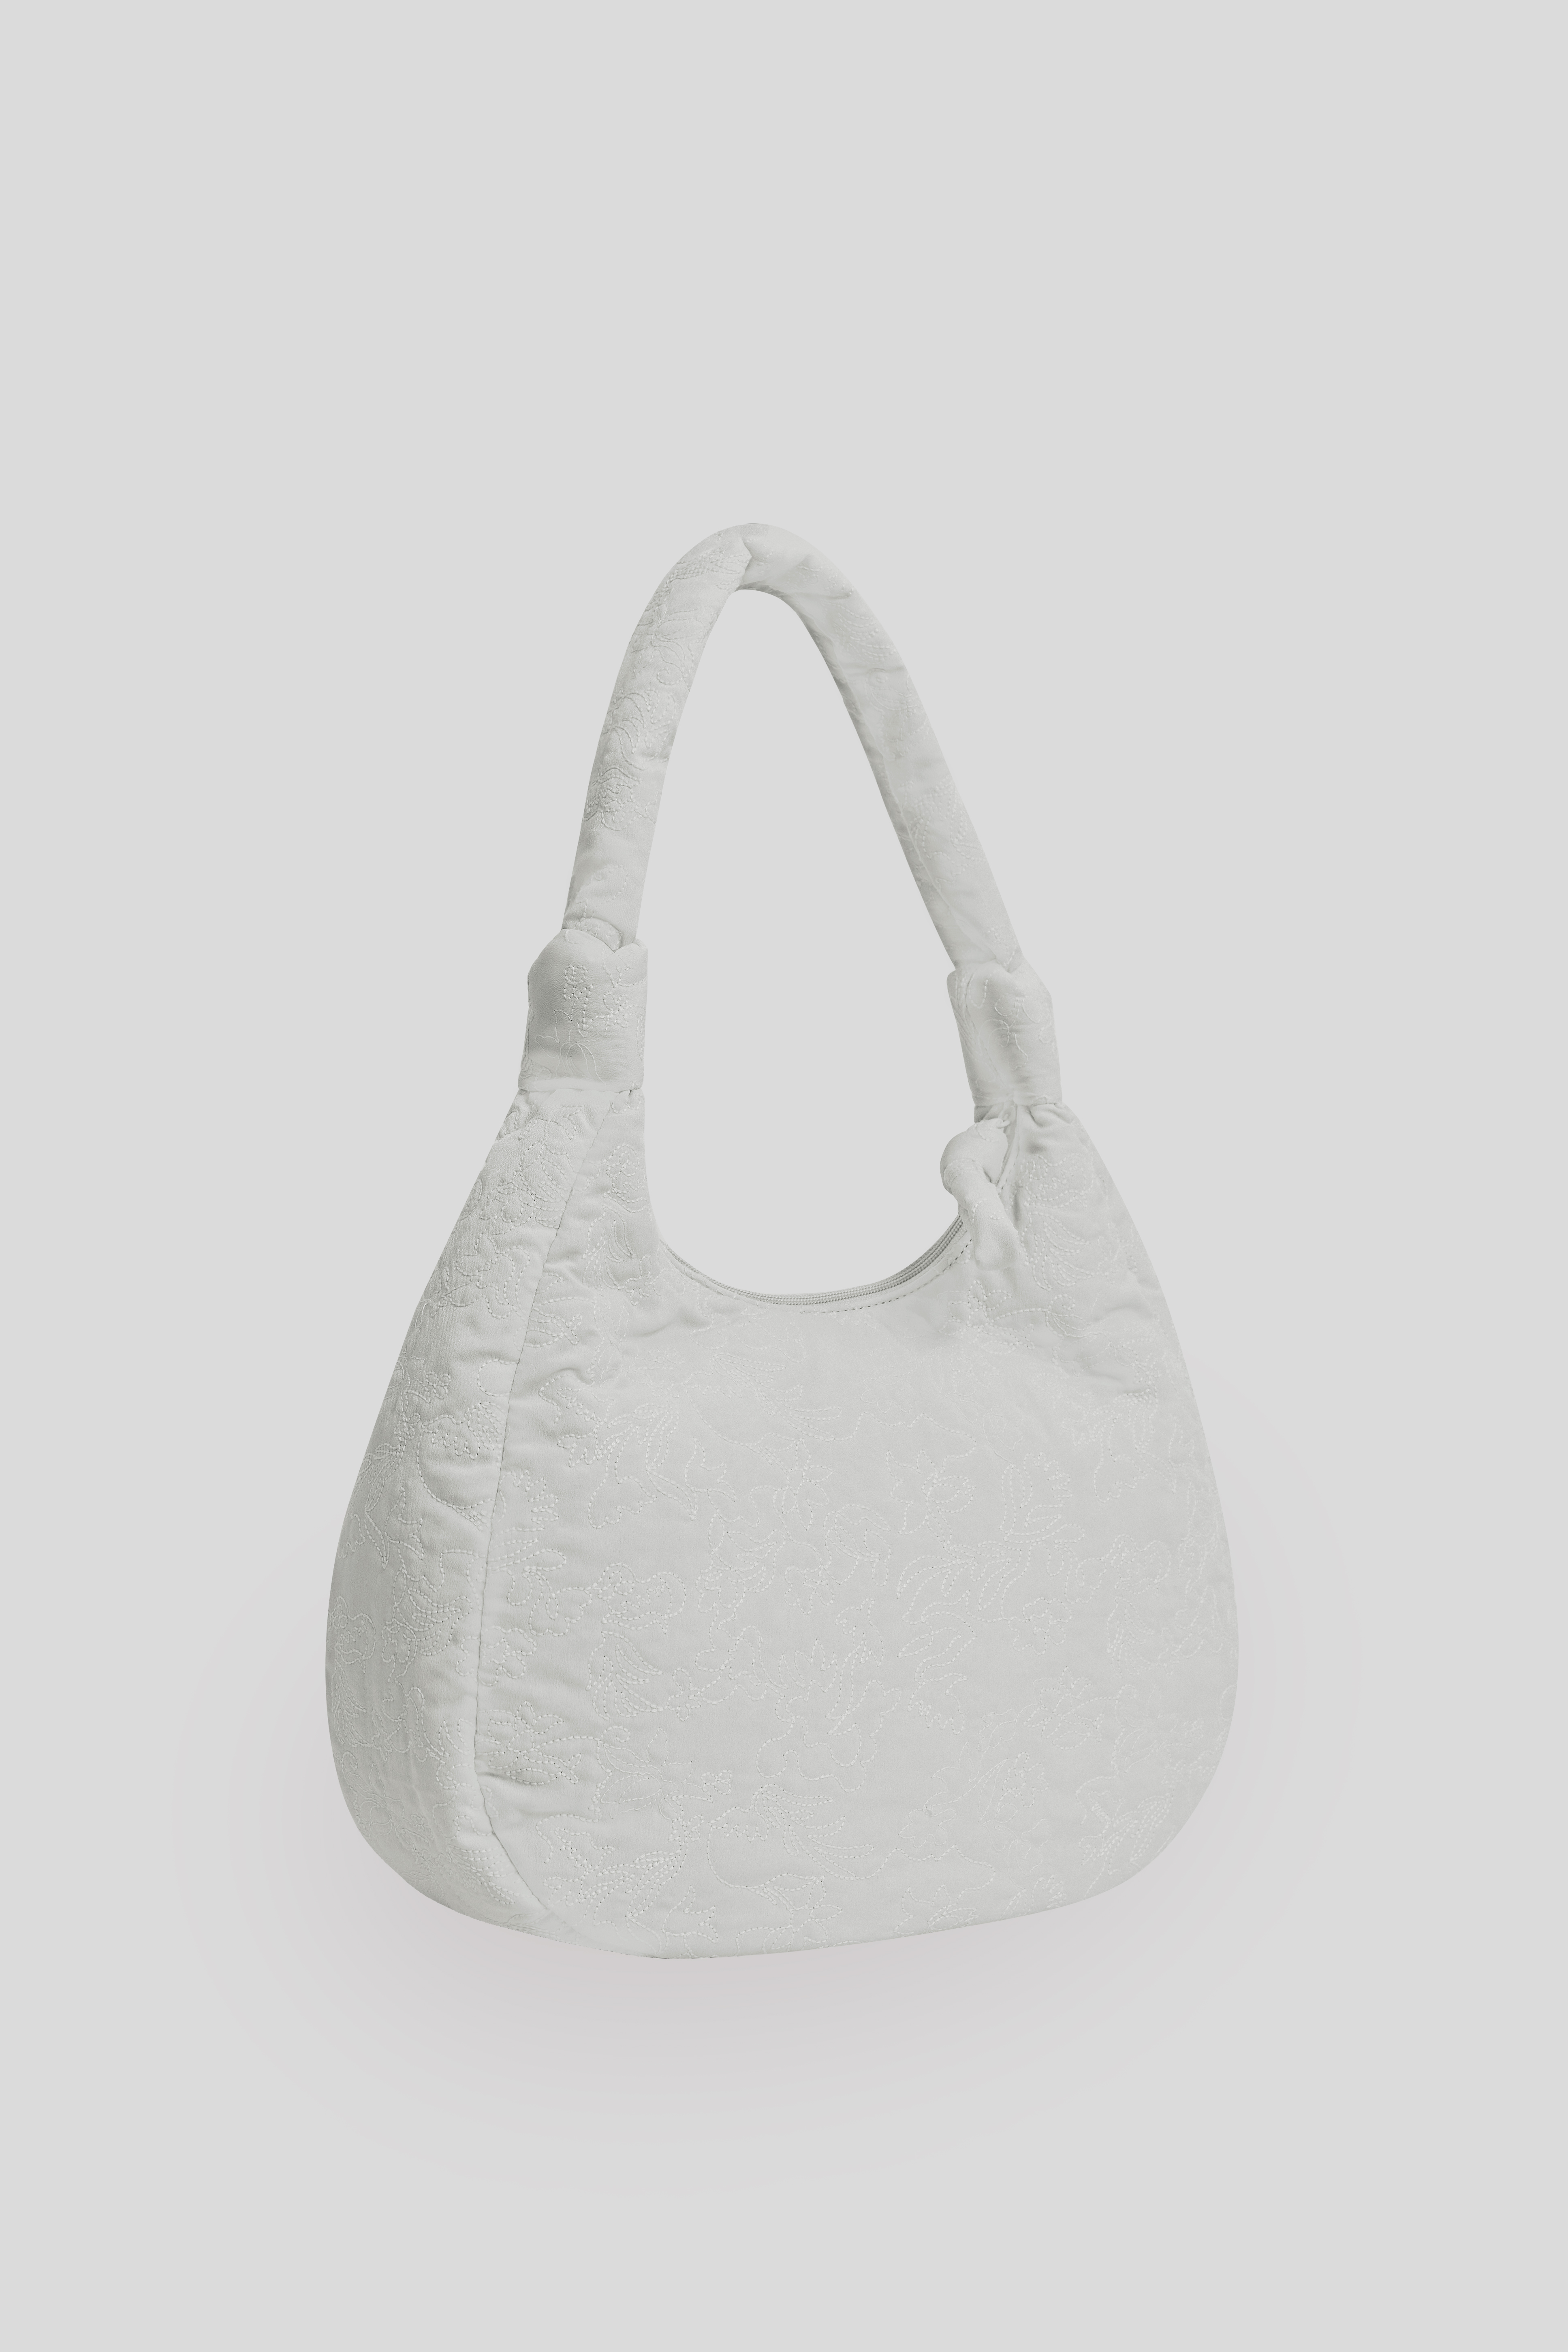 EMBROIDERY HOBO BAG IN WHITE